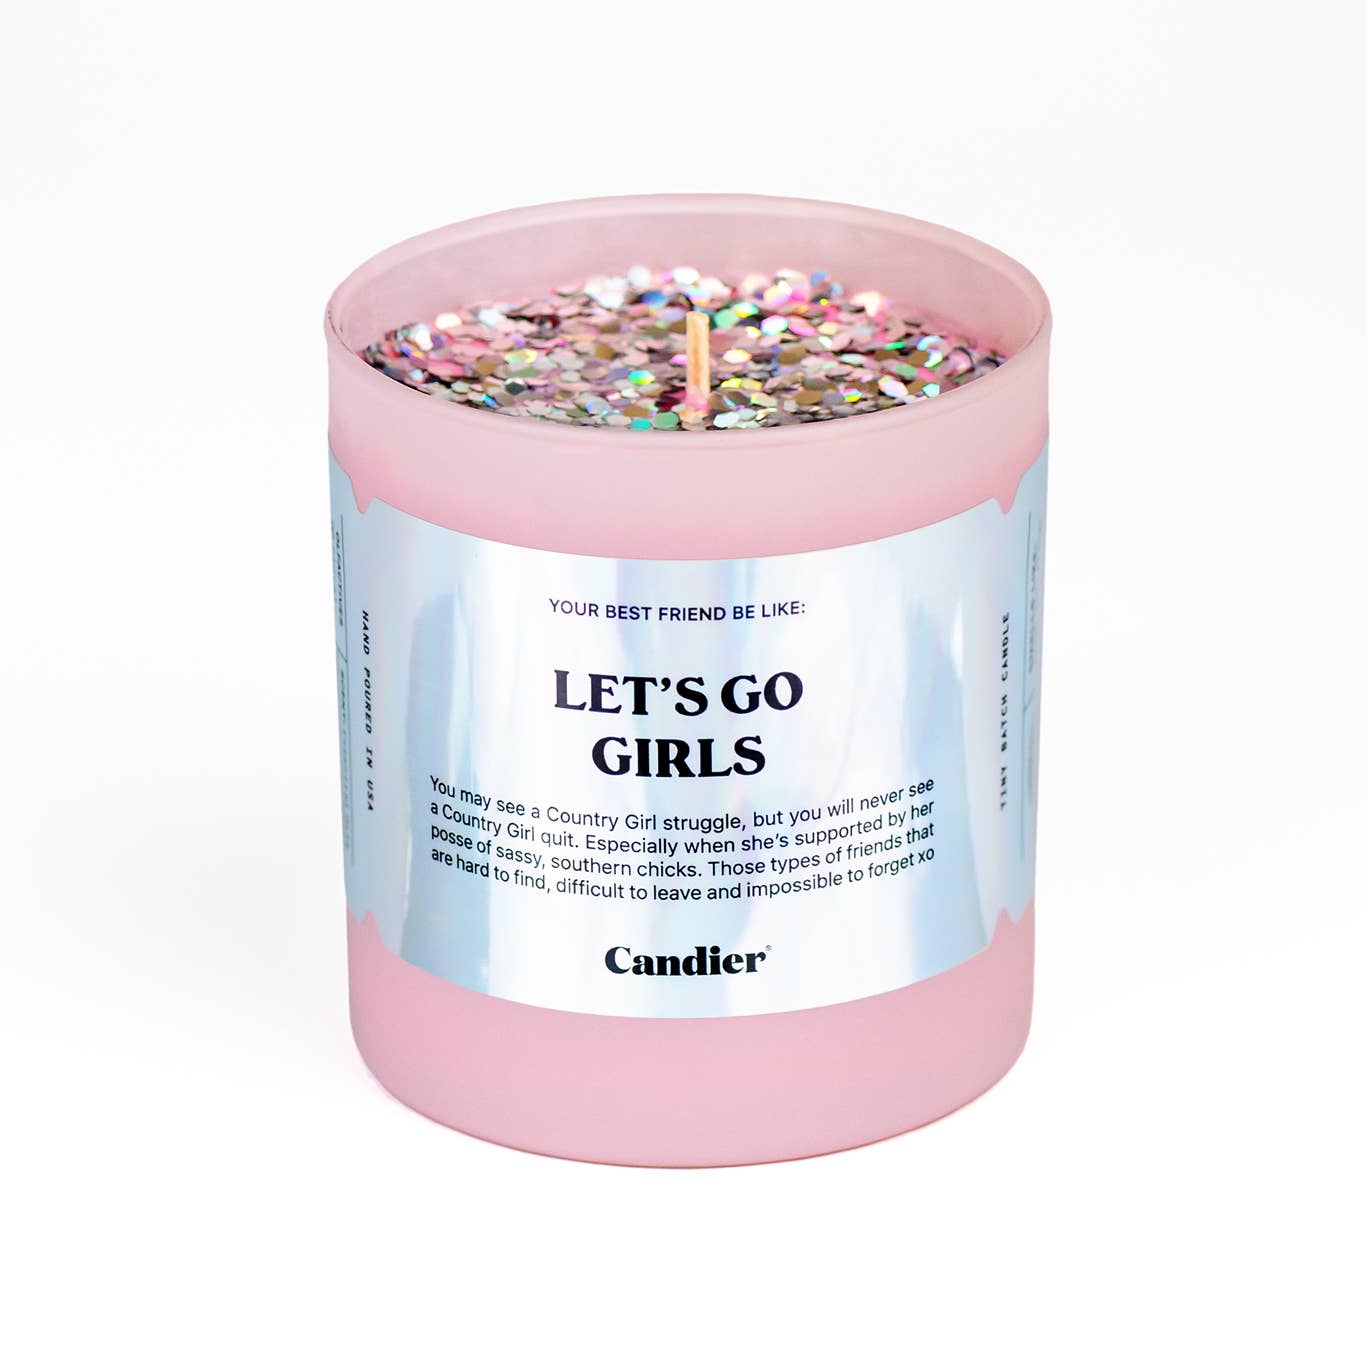 Candier - Let's Go Girls Candle